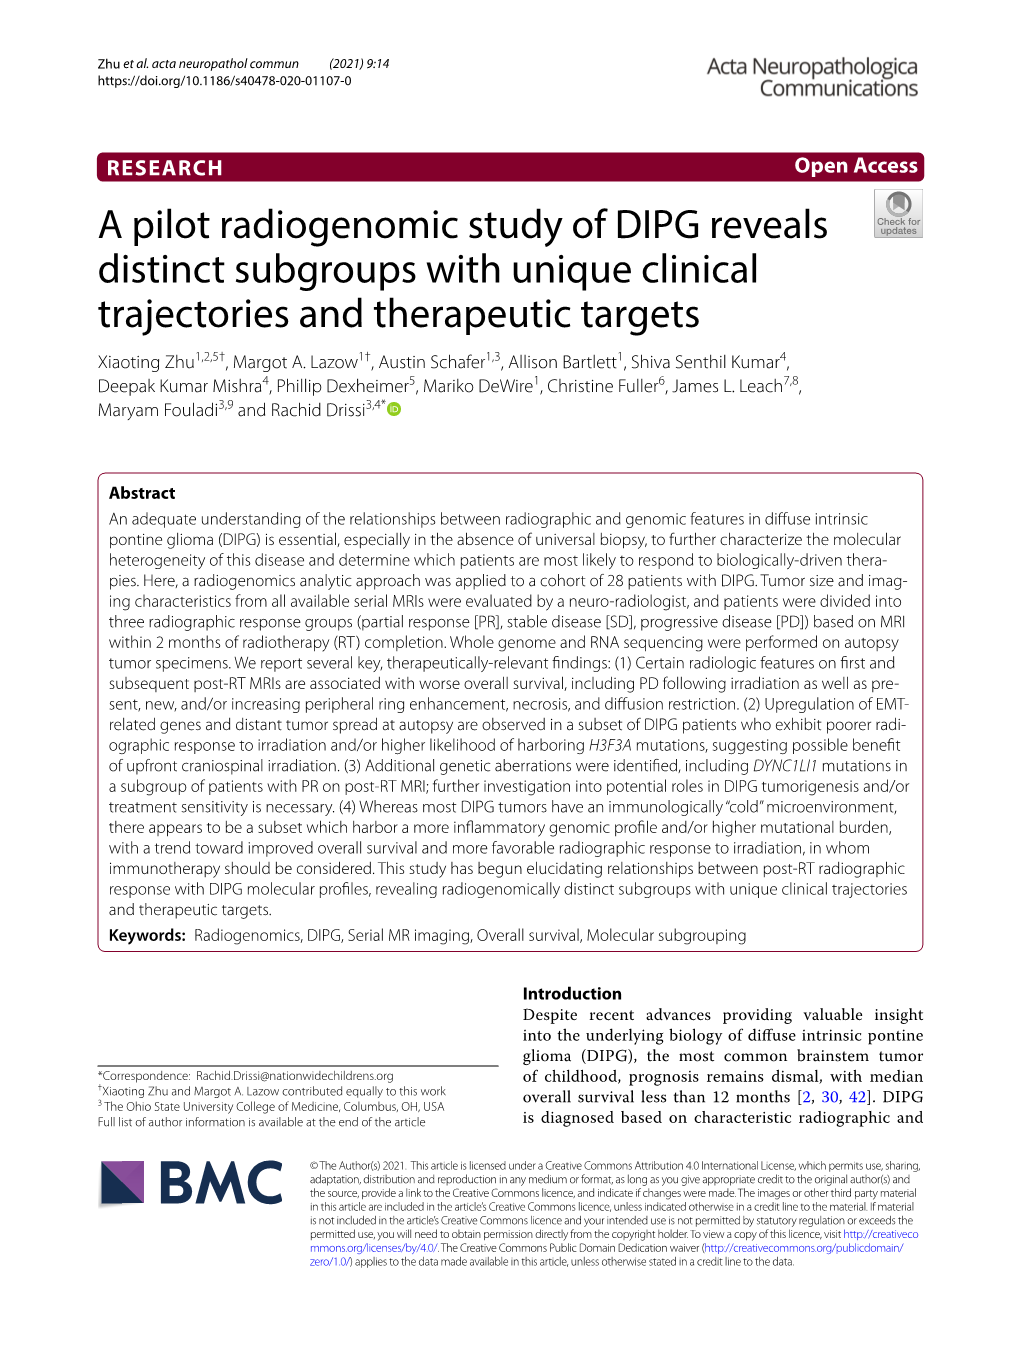 A Pilot Radiogenomic Study of DIPG Reveals Distinct Subgroups with Unique Clinical Trajectories and Therapeutic Targets Xiaoting Zhu1,2,5†, Margot A